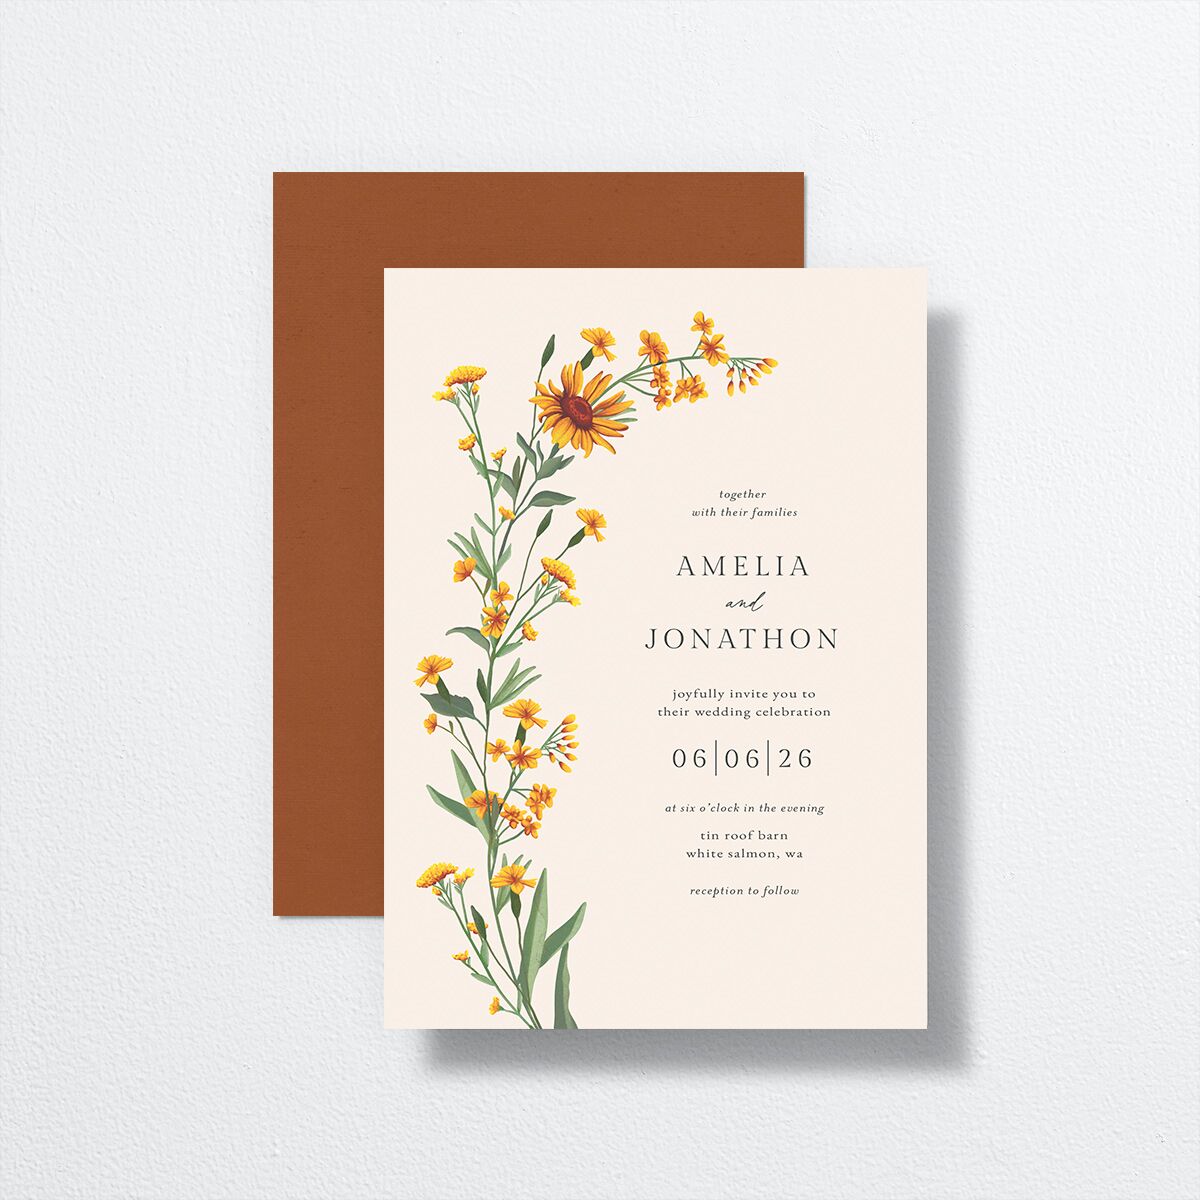 Wild Daisies Wedding Invitations front-and-back in yellow